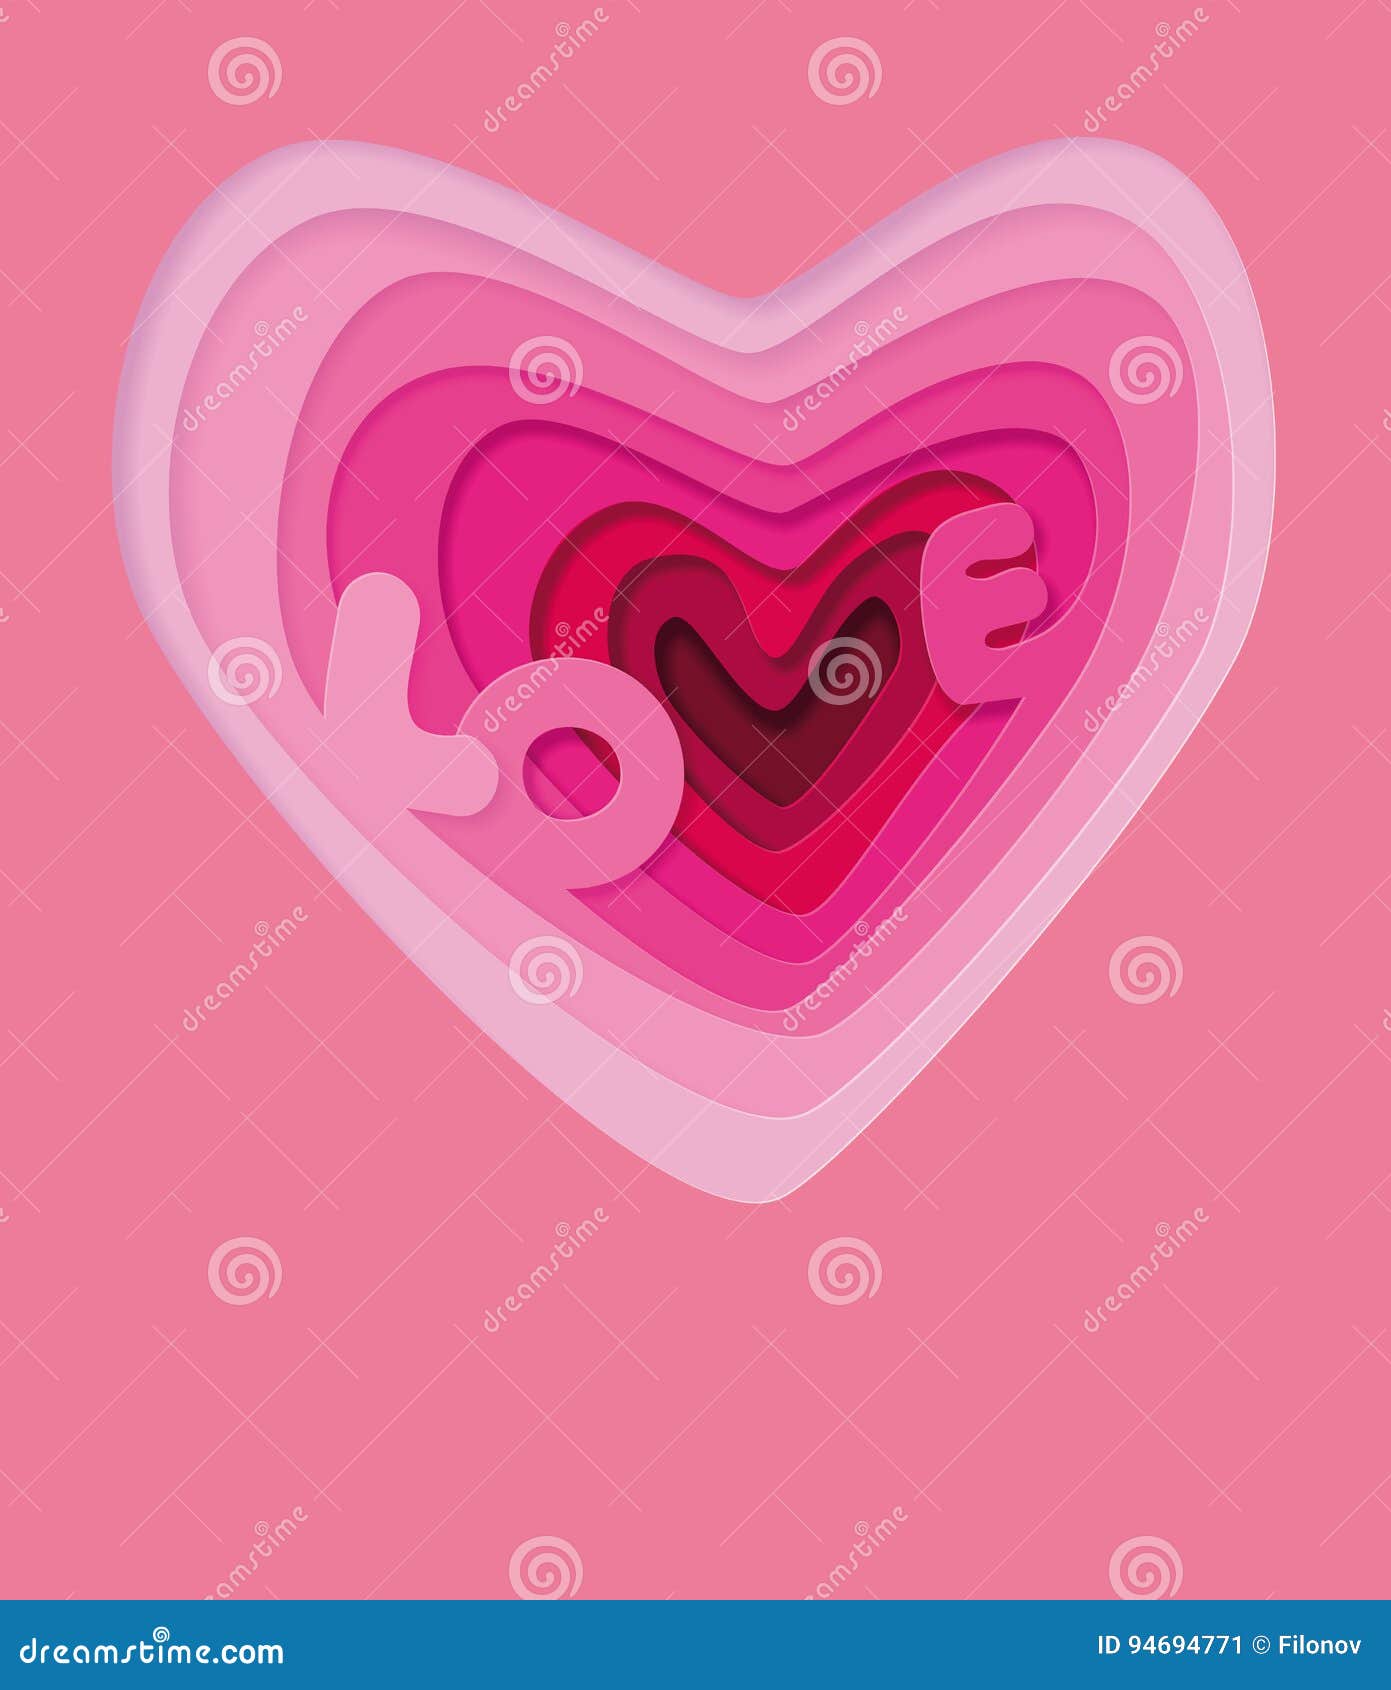 Love in Heart - Illustration Template. Love Wedding Symbols for a ...